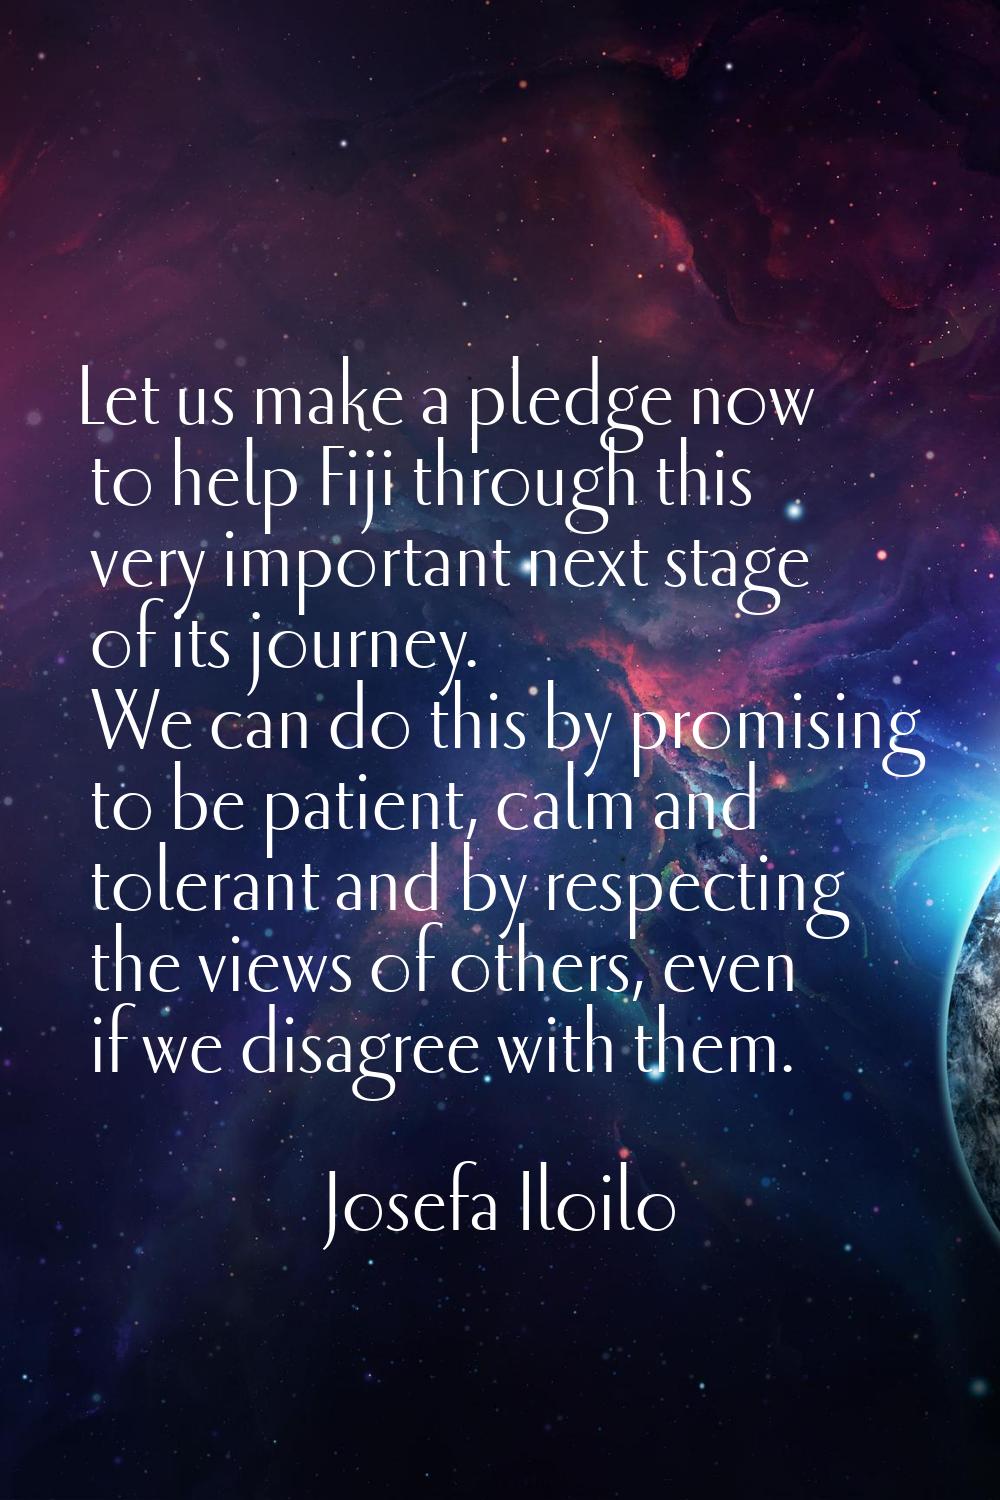 Let us make a pledge now to help Fiji through this very important next stage of its journey. We can